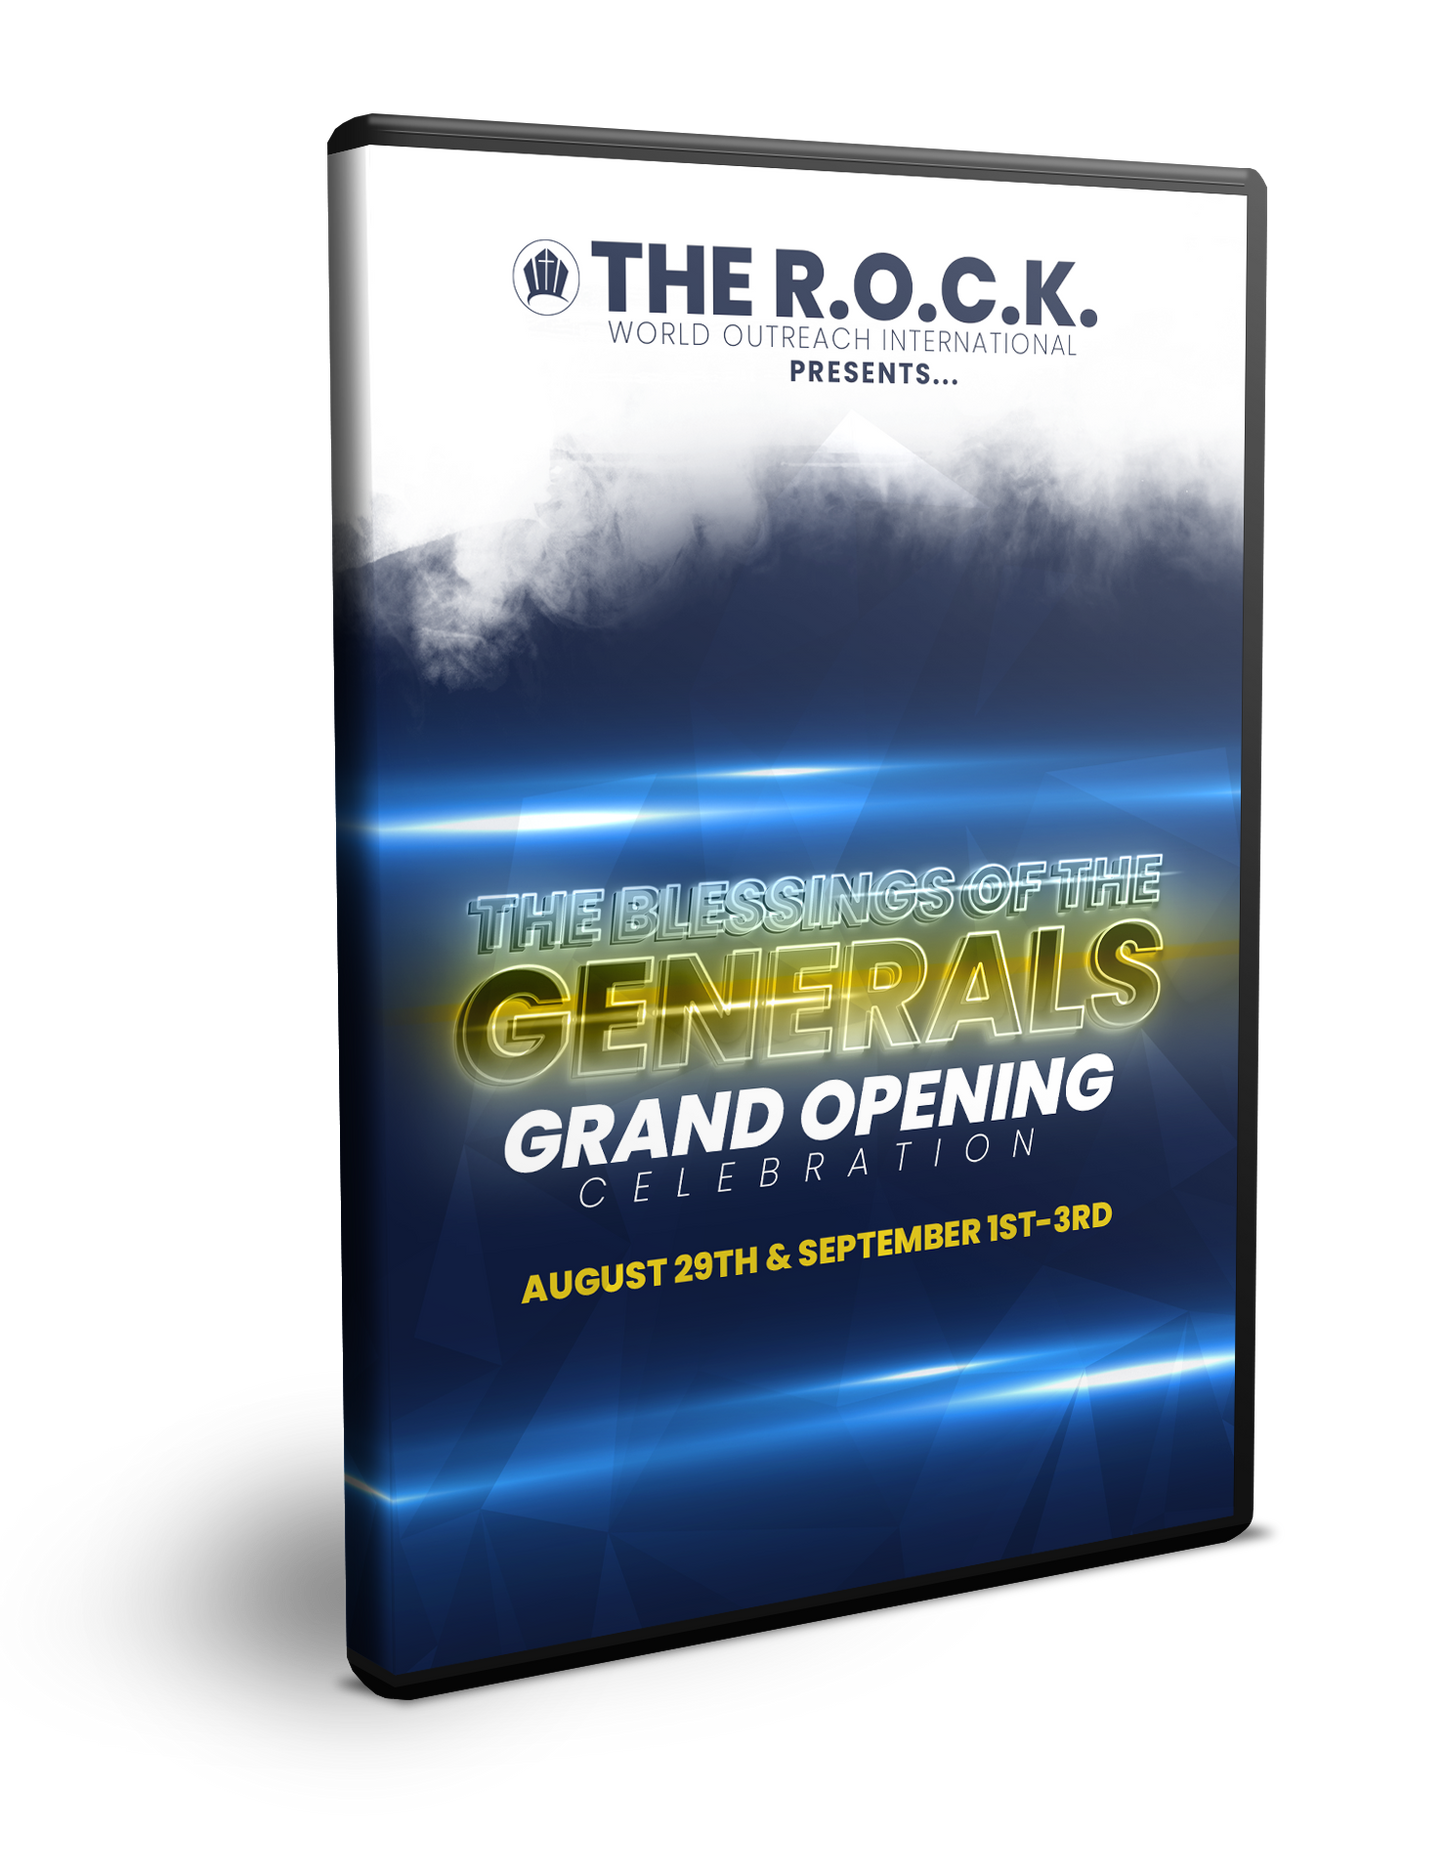 The Blessings of the Generals (Grand Opening) Series